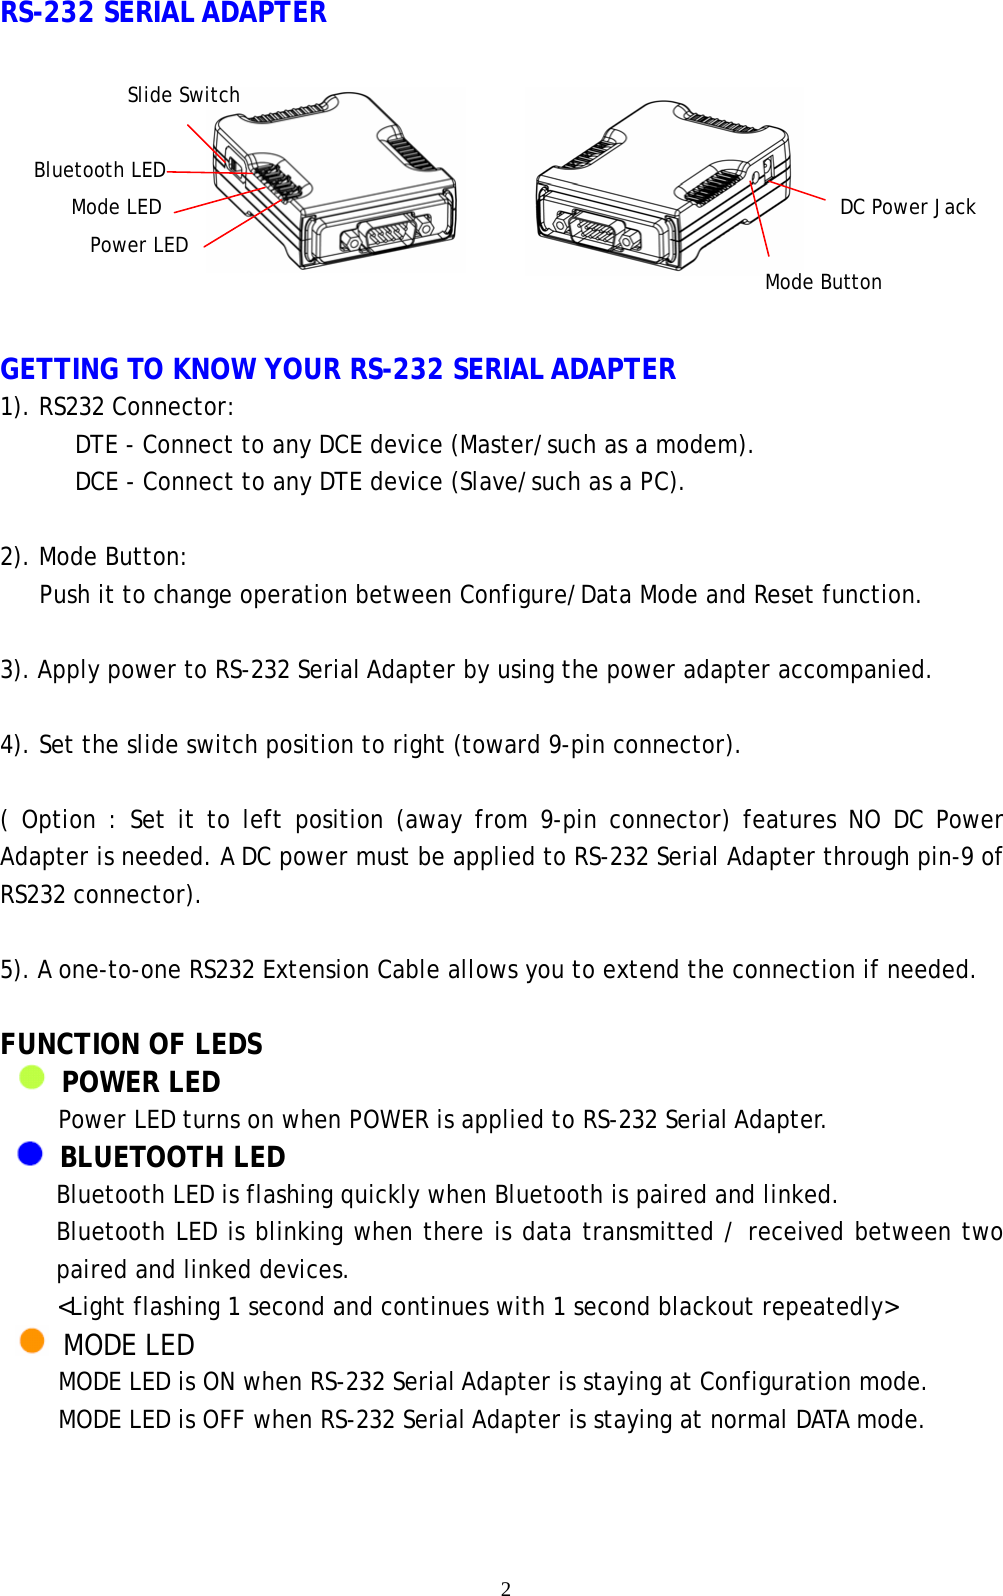    2 RS-232 SERIAL ADAPTER    GETTING TO KNOW YOUR RS-232 SERIAL ADAPTER 1). RS232 Connector:     DTE - Connect to any DCE device (Master/such as a modem).   DCE - Connect to any DTE device (Slave/such as a PC).  2). Mode Button: Push it to change operation between Configure/Data Mode and Reset function.  3). Apply power to RS-232 Serial Adapter by using the power adapter accompanied.  4). Set the slide switch position to right (toward 9-pin connector).    ( Option : Set it to left position (away from 9-pin connector) features NO DC Power Adapter is needed. A DC power must be applied to RS-232 Serial Adapter through pin-9 of RS232 connector).  5). A one-to-one RS232 Extension Cable allows you to extend the connection if needed.  FUNCTION OF LEDS    POWER LED Power LED turns on when POWER is applied to RS-232 Serial Adapter.  BLUETOOTH LED Bluetooth LED is flashing quickly when Bluetooth is paired and linked. Bluetooth LED is blinking when there is data transmitted / received between two paired and linked devices. &lt;Light flashing 1 second and continues with 1 second blackout repeatedly&gt;  MODE LED MODE LED is ON when RS-232 Serial Adapter is staying at Configuration mode. MODE LED is OFF when RS-232 Serial Adapter is staying at normal DATA mode.  Slide Switch DC Power Jack Mode Button Bluetooth LED Mode LED Power LED 